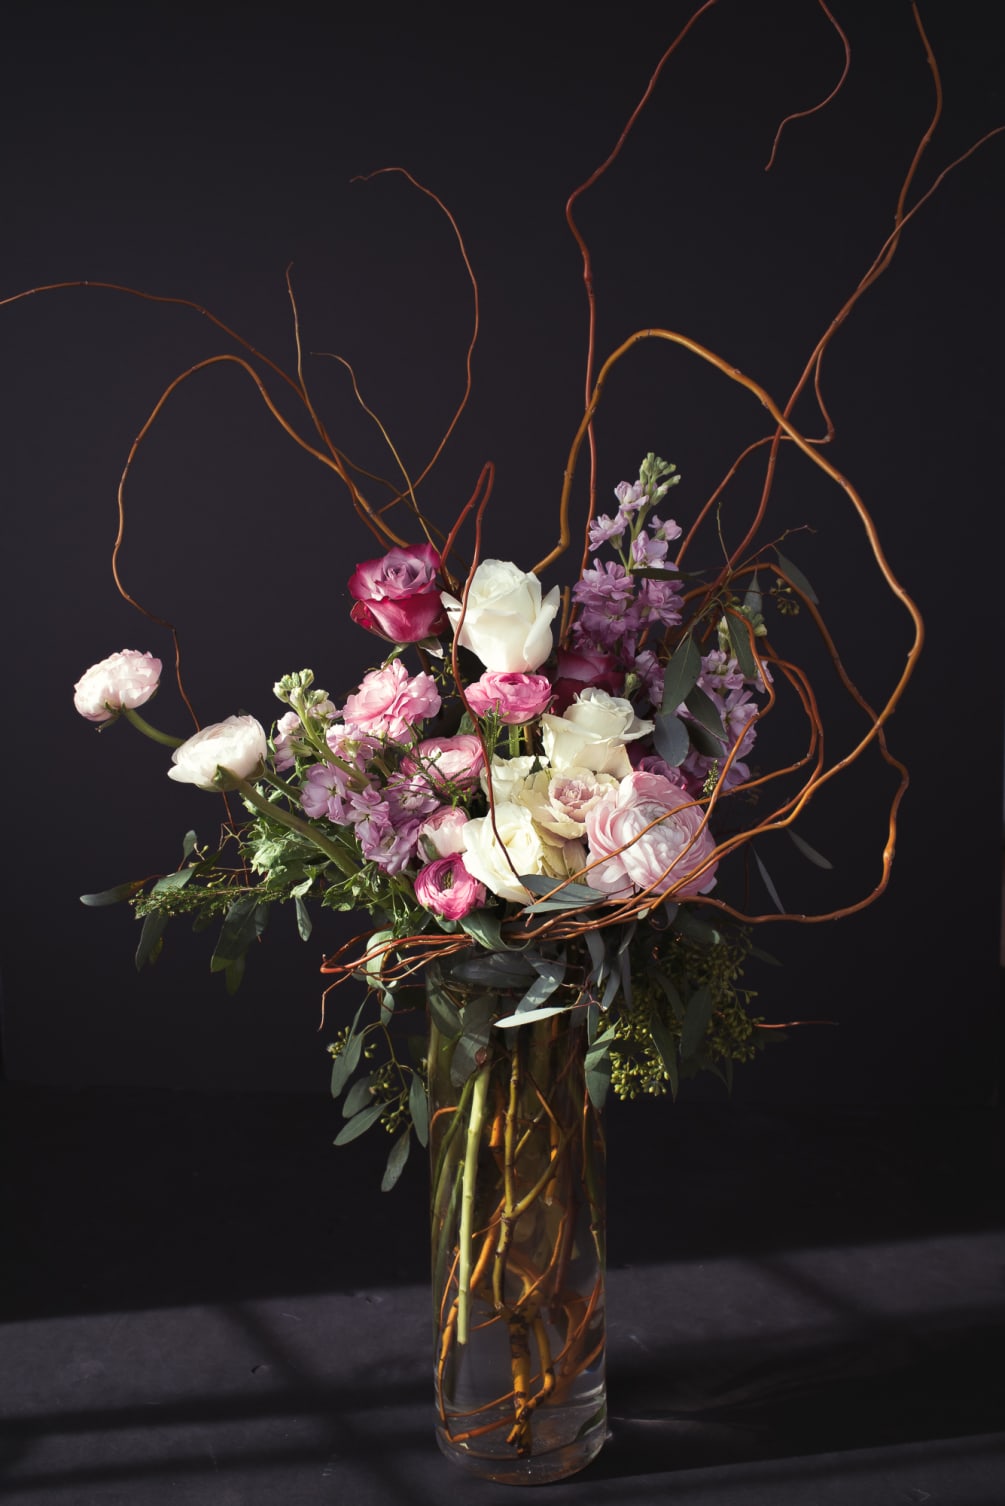 A romantic piece filled with delicate ranunculus, and an array of shades